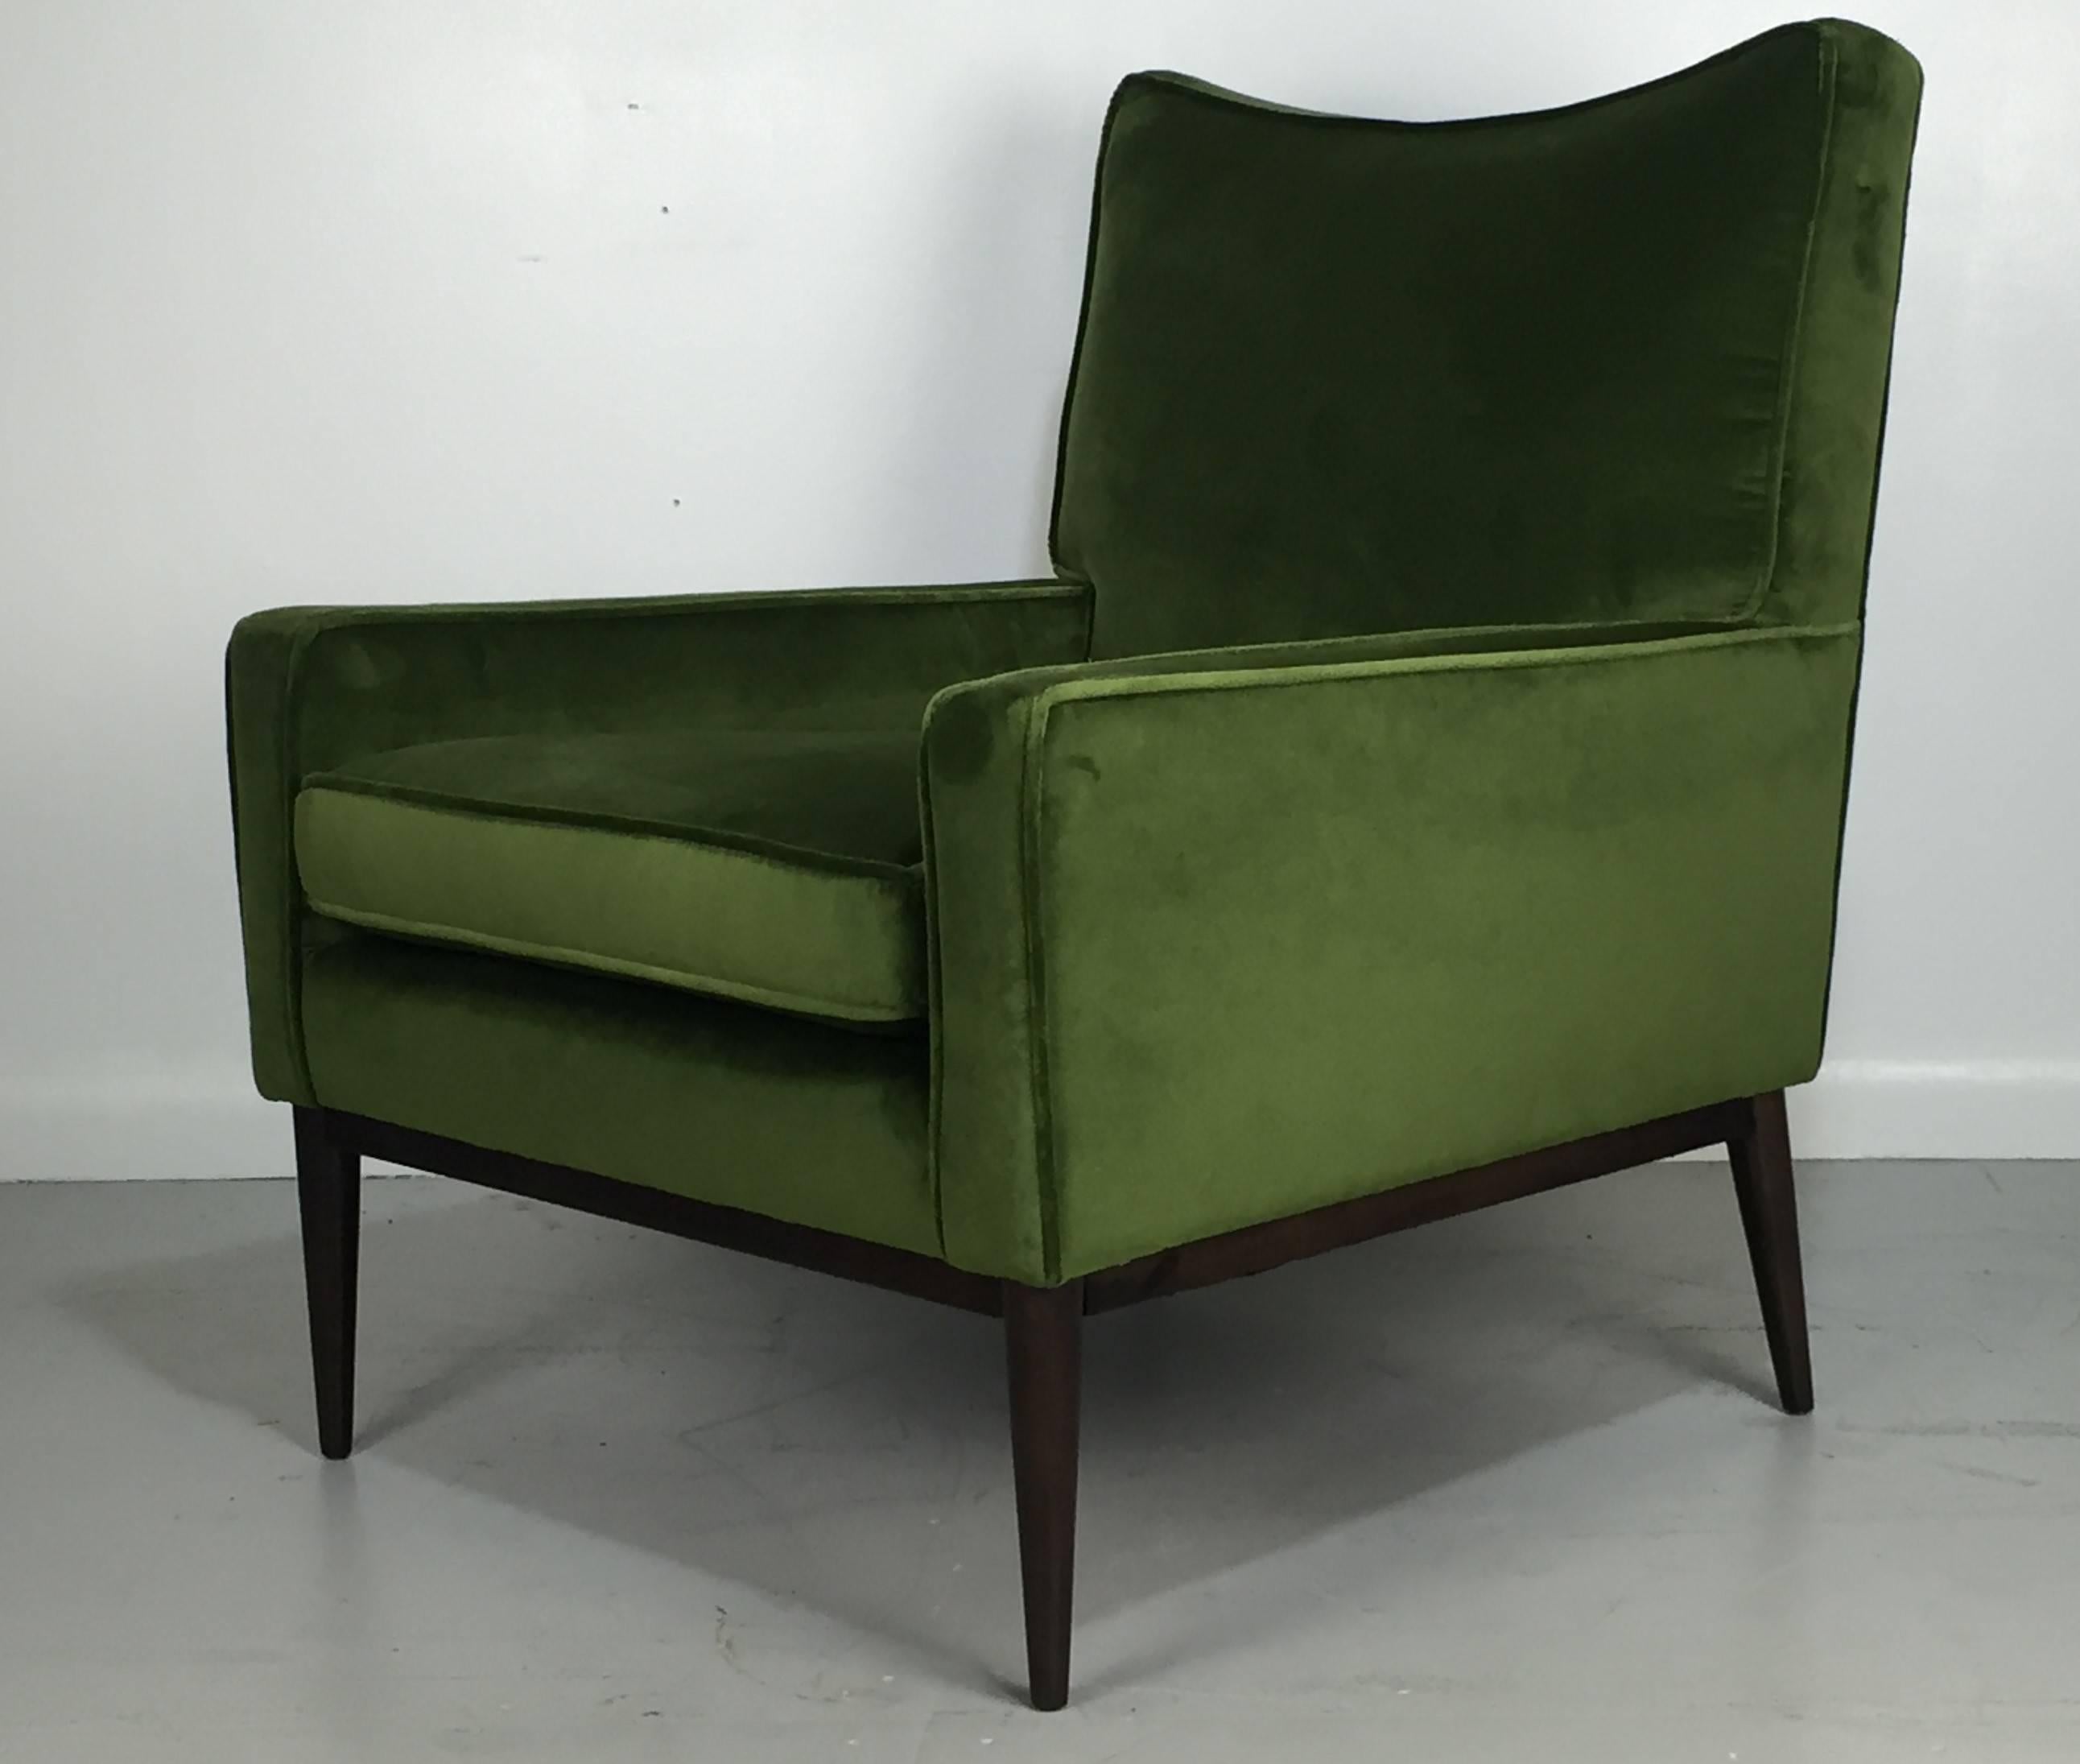 Beautifully refinished and reupholstered in a luscious green velvet, this iconic Paul McCobb lounge chair has had a ground up restoration of the walnut base and will provide the perfect accent chair for your project.
         